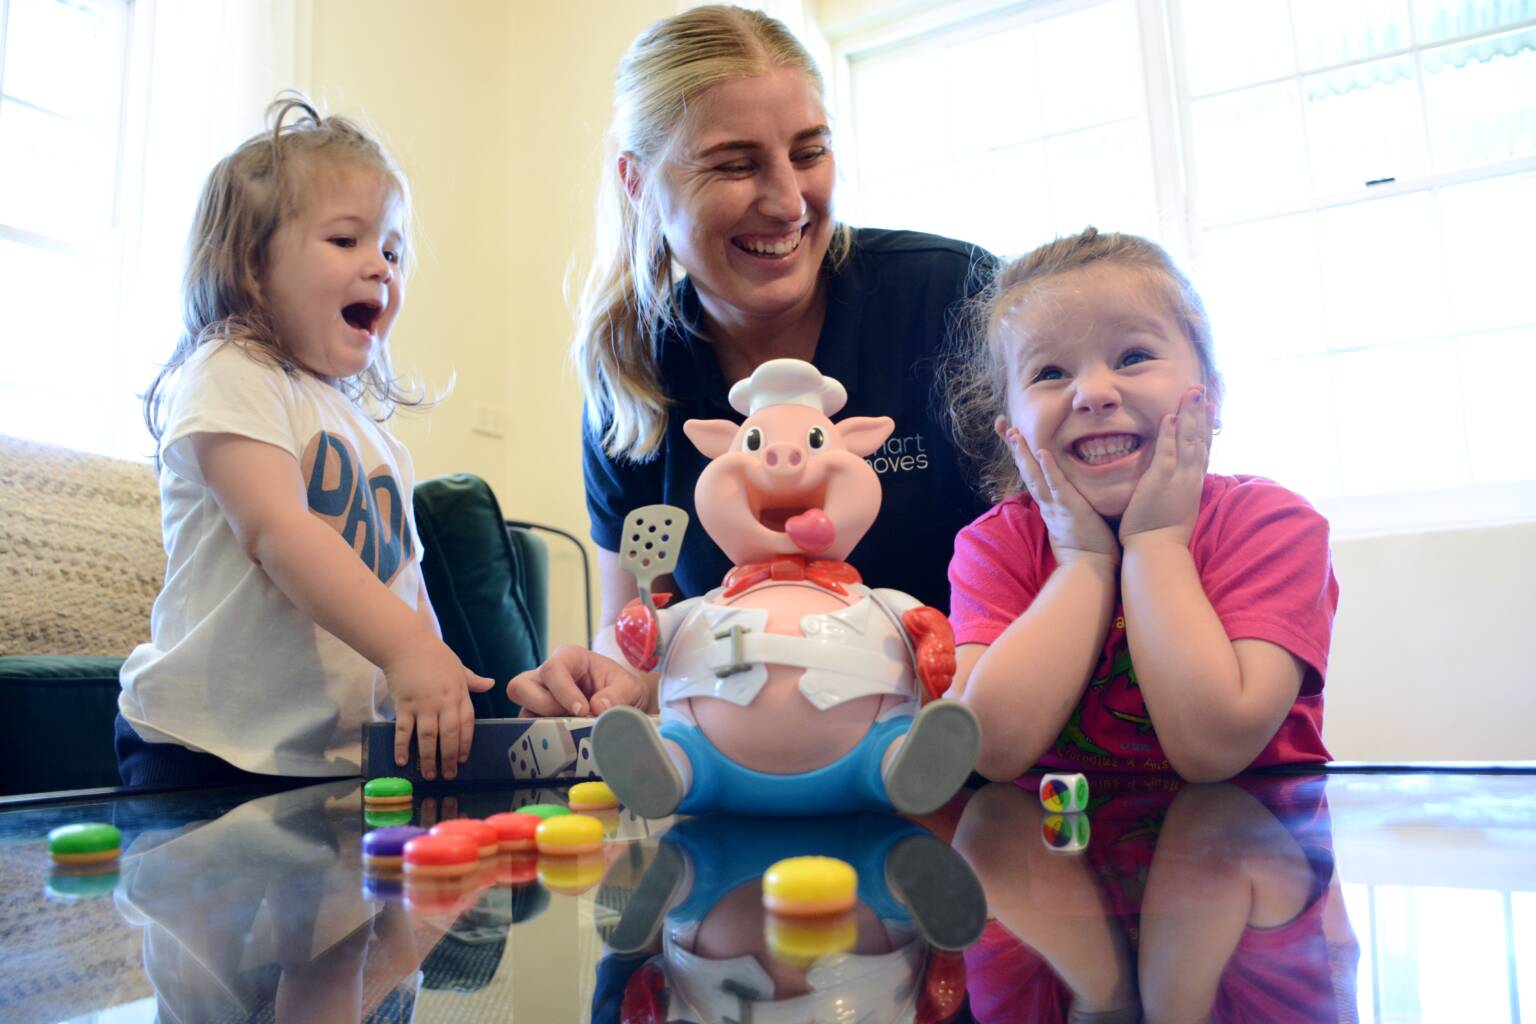 Paediatric OT playing Pop the Pig game with 2 young girls